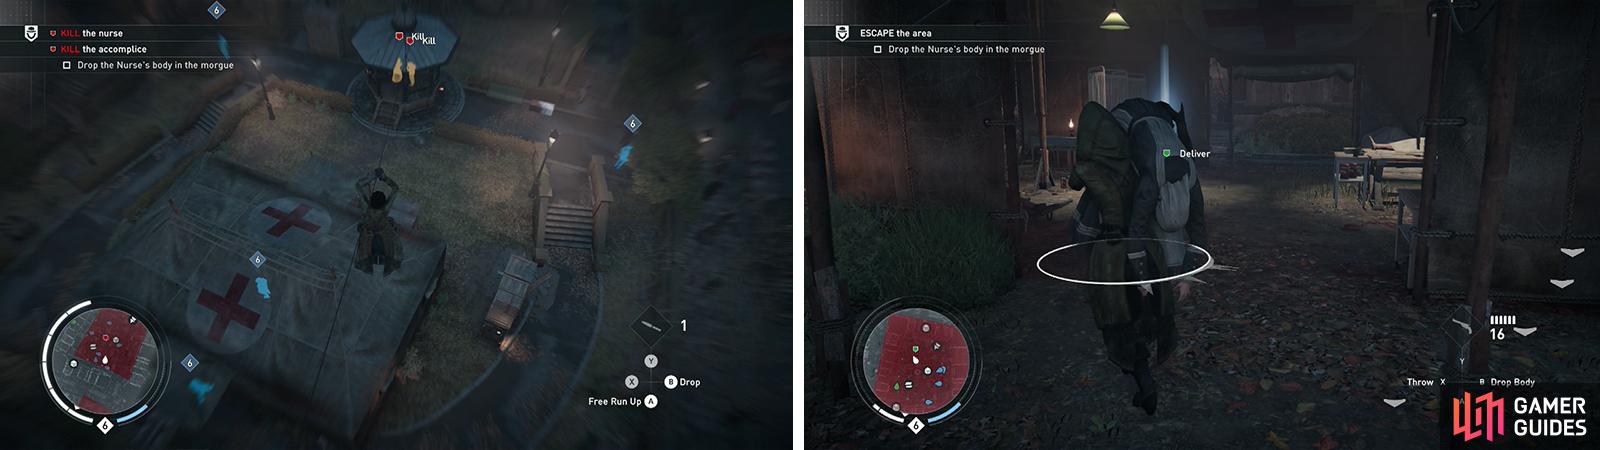 The targets will occasionally come together in the gazebo (left). After killing them throw the nurse’s body in the morgue for the optional objective (right).